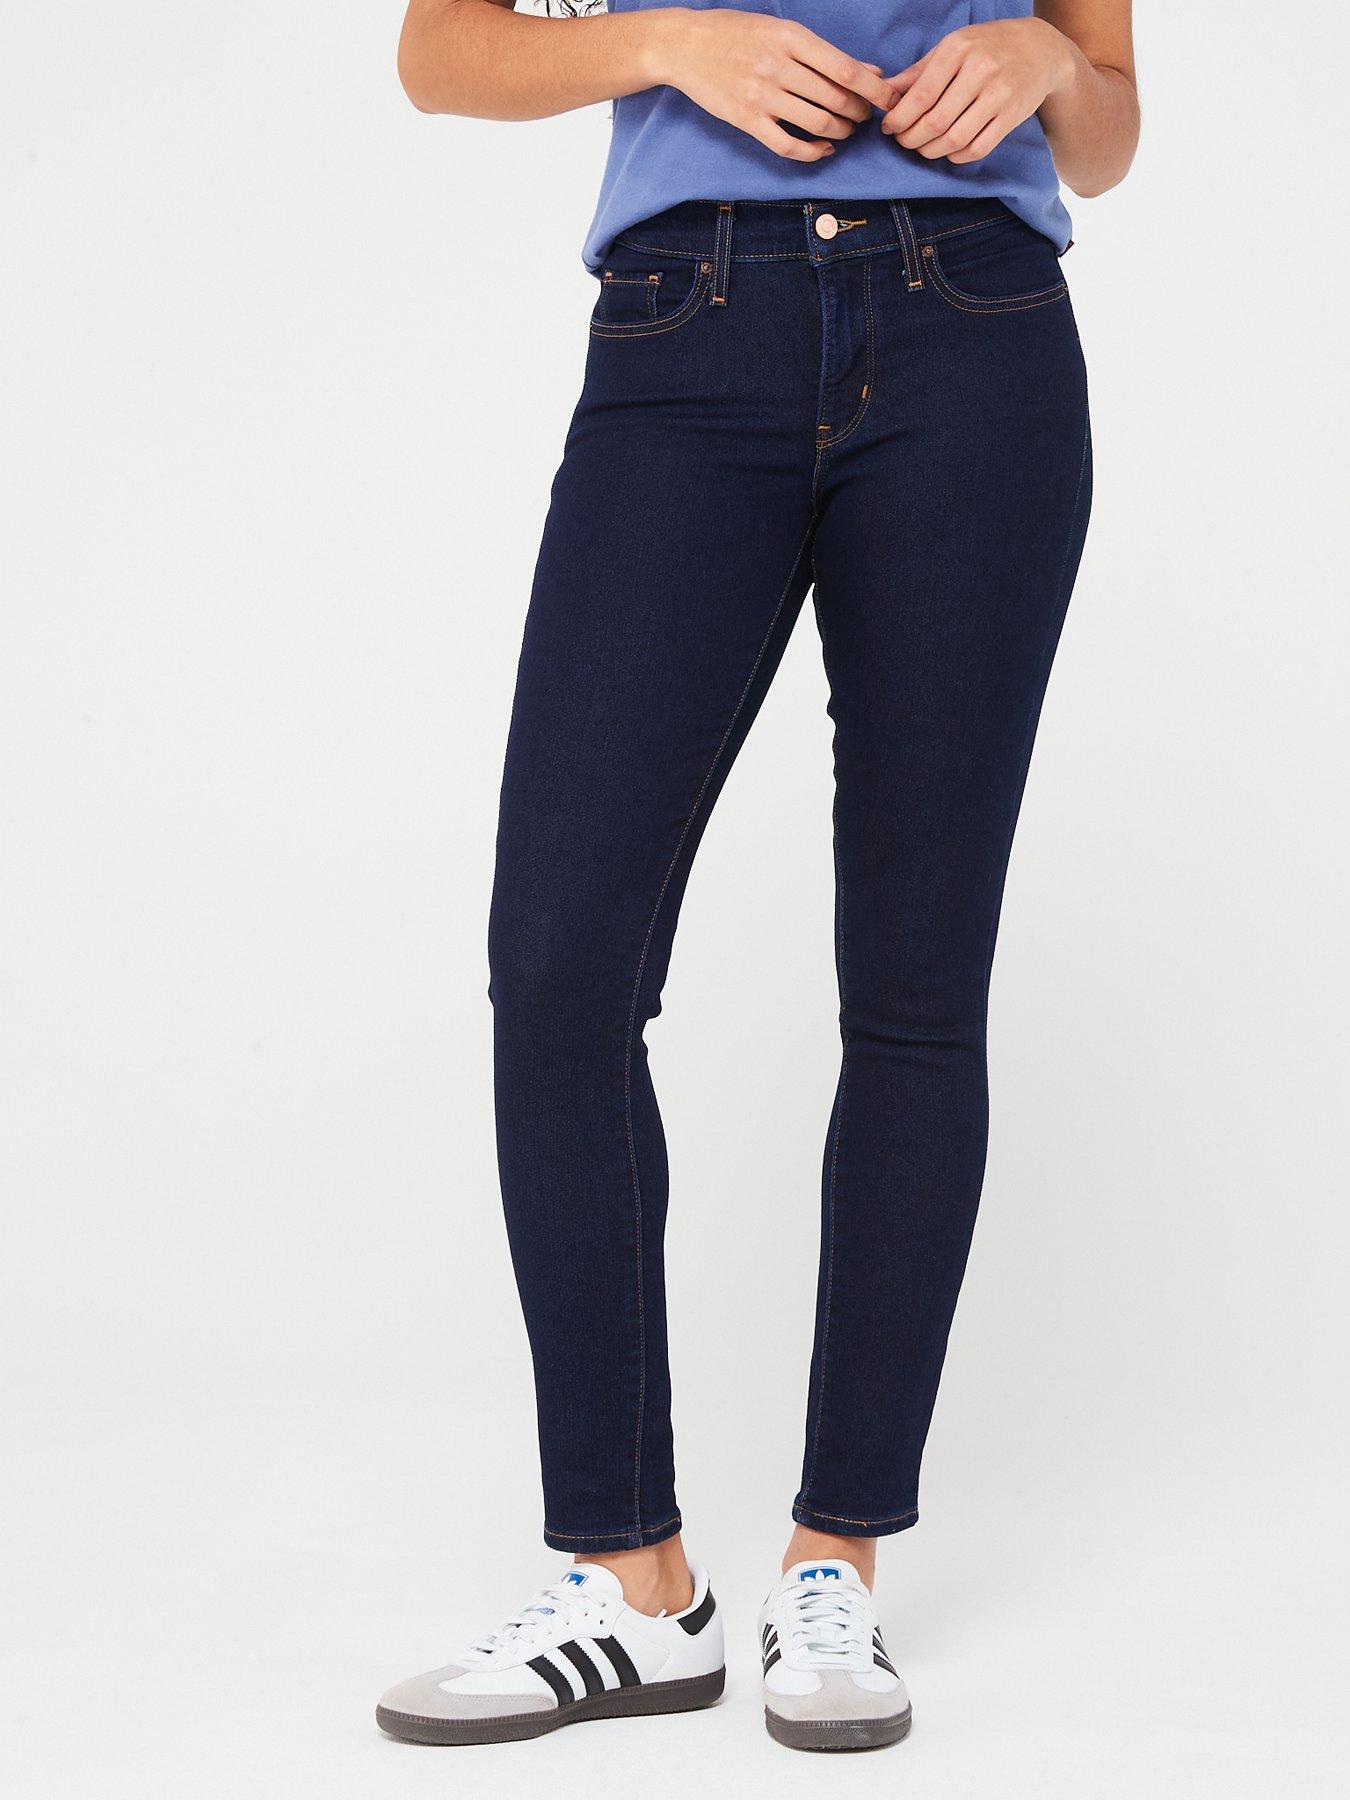 Exposed Button 311 Shaping Ankle Skinny Women's Jeans - Medium